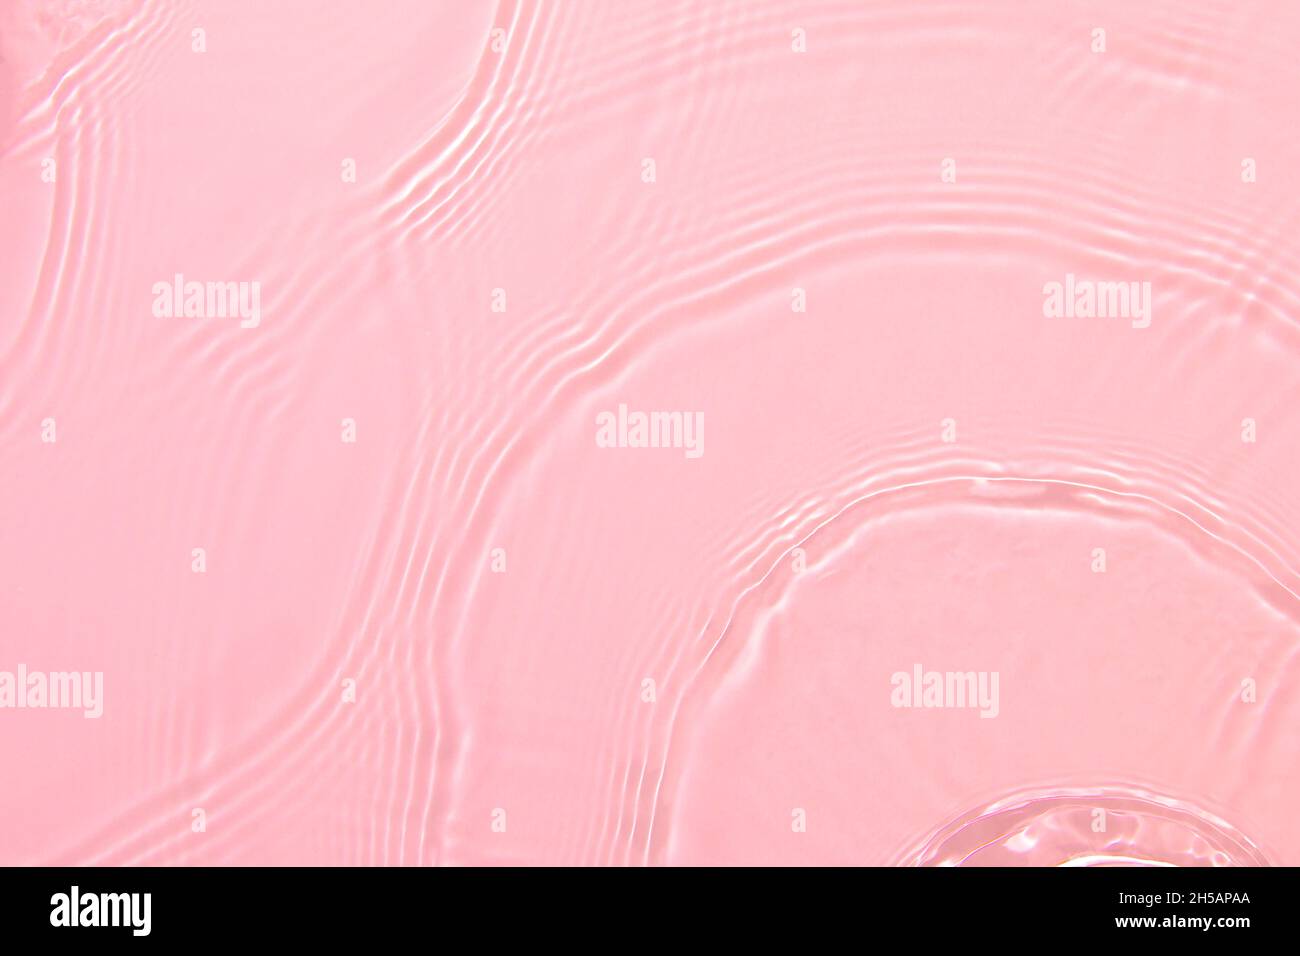 https://c8.alamy.com/comp/2H5APAA/pink-transparent-clear-water-surface-texture-summer-background-2H5APAA.jpg